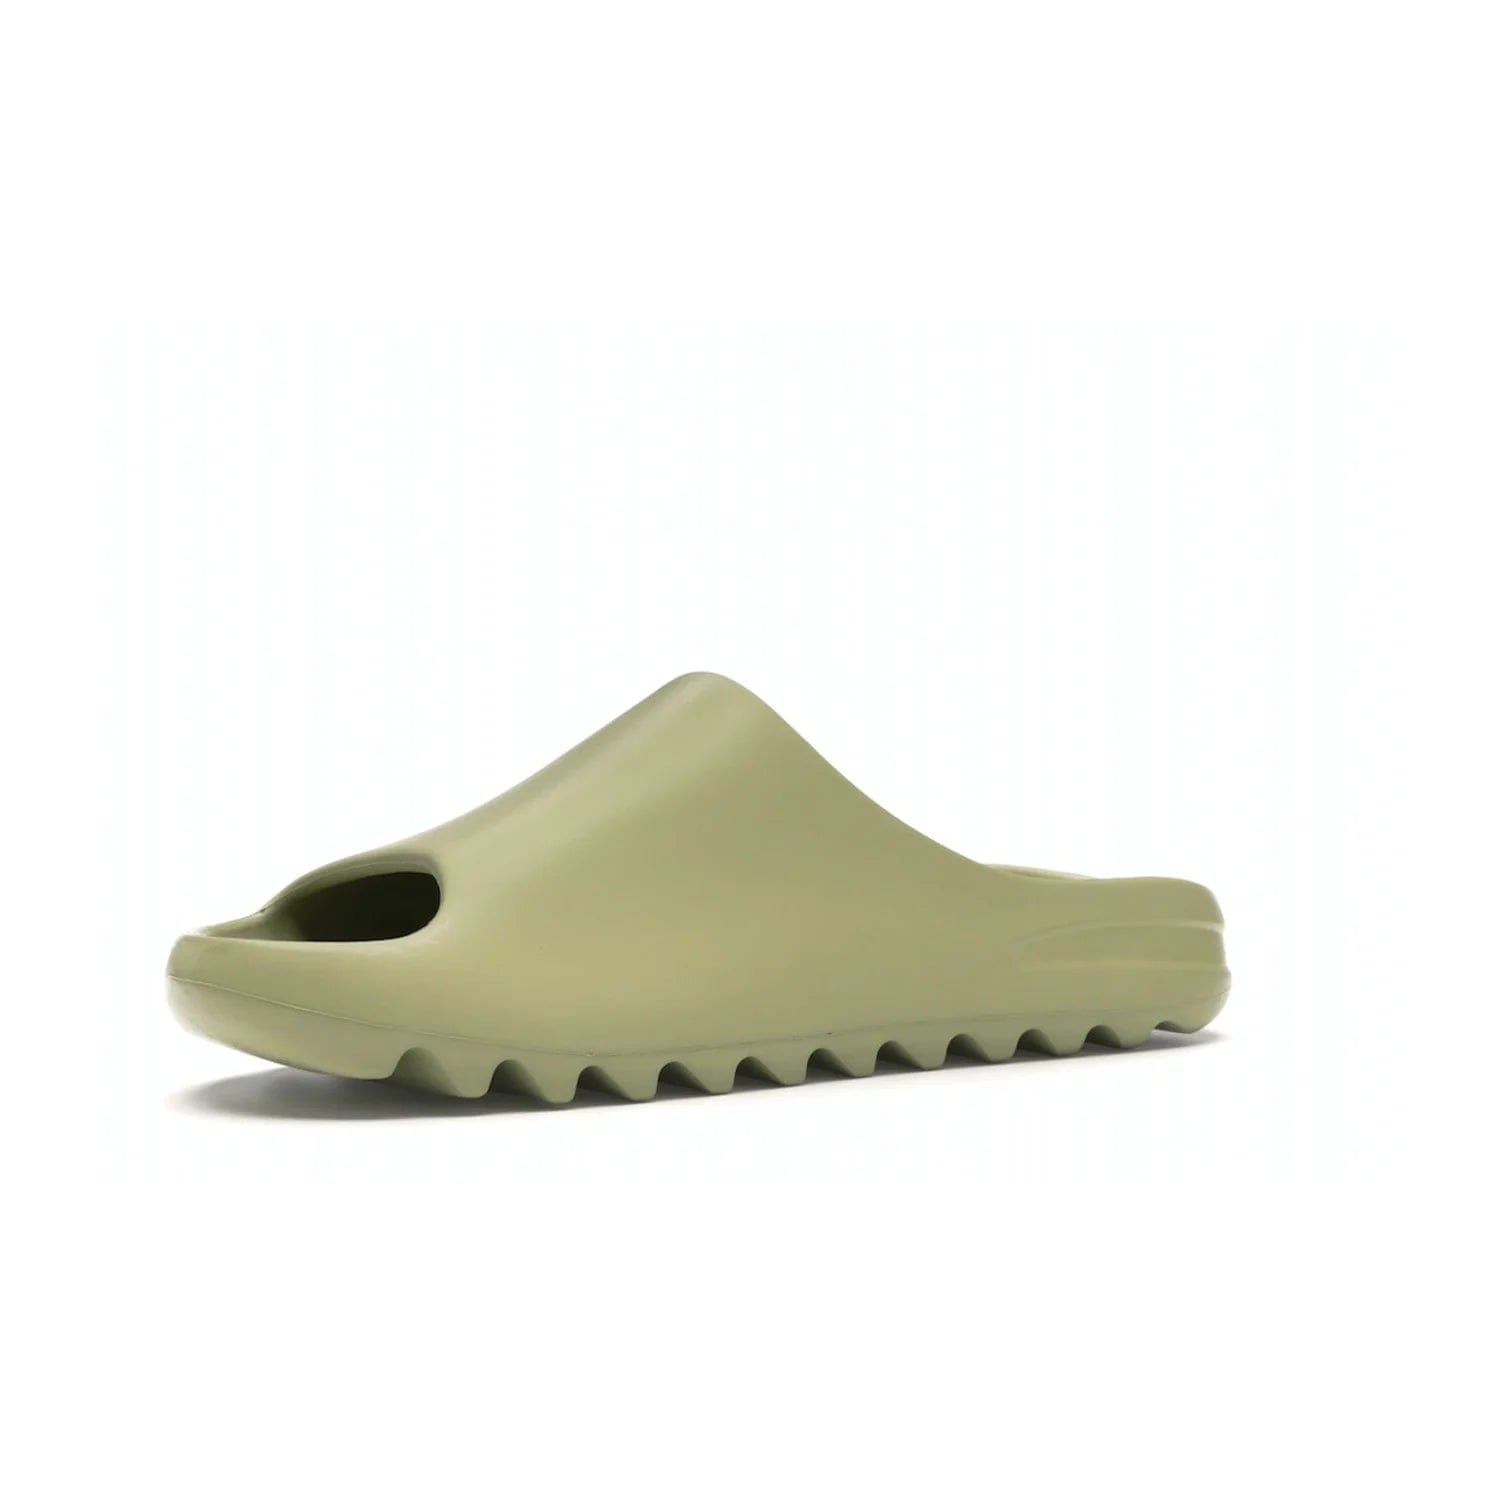 adidas Yeezy Slide Resin (2019/2021) - Image 16 - Only at www.BallersClubKickz.com - Step into fashion and function with the adidas Yeezy Slide Resin. Featuring a lightweight Resin EVA foam construction and an outsole with accentuated grooves for traction and support. The latest release is available in a Resin/Resin/Resin colorway, combining modern aesthetics and classic style. Step into style with the adidas Yeezy Slide Resin and be the trend-setter this season.